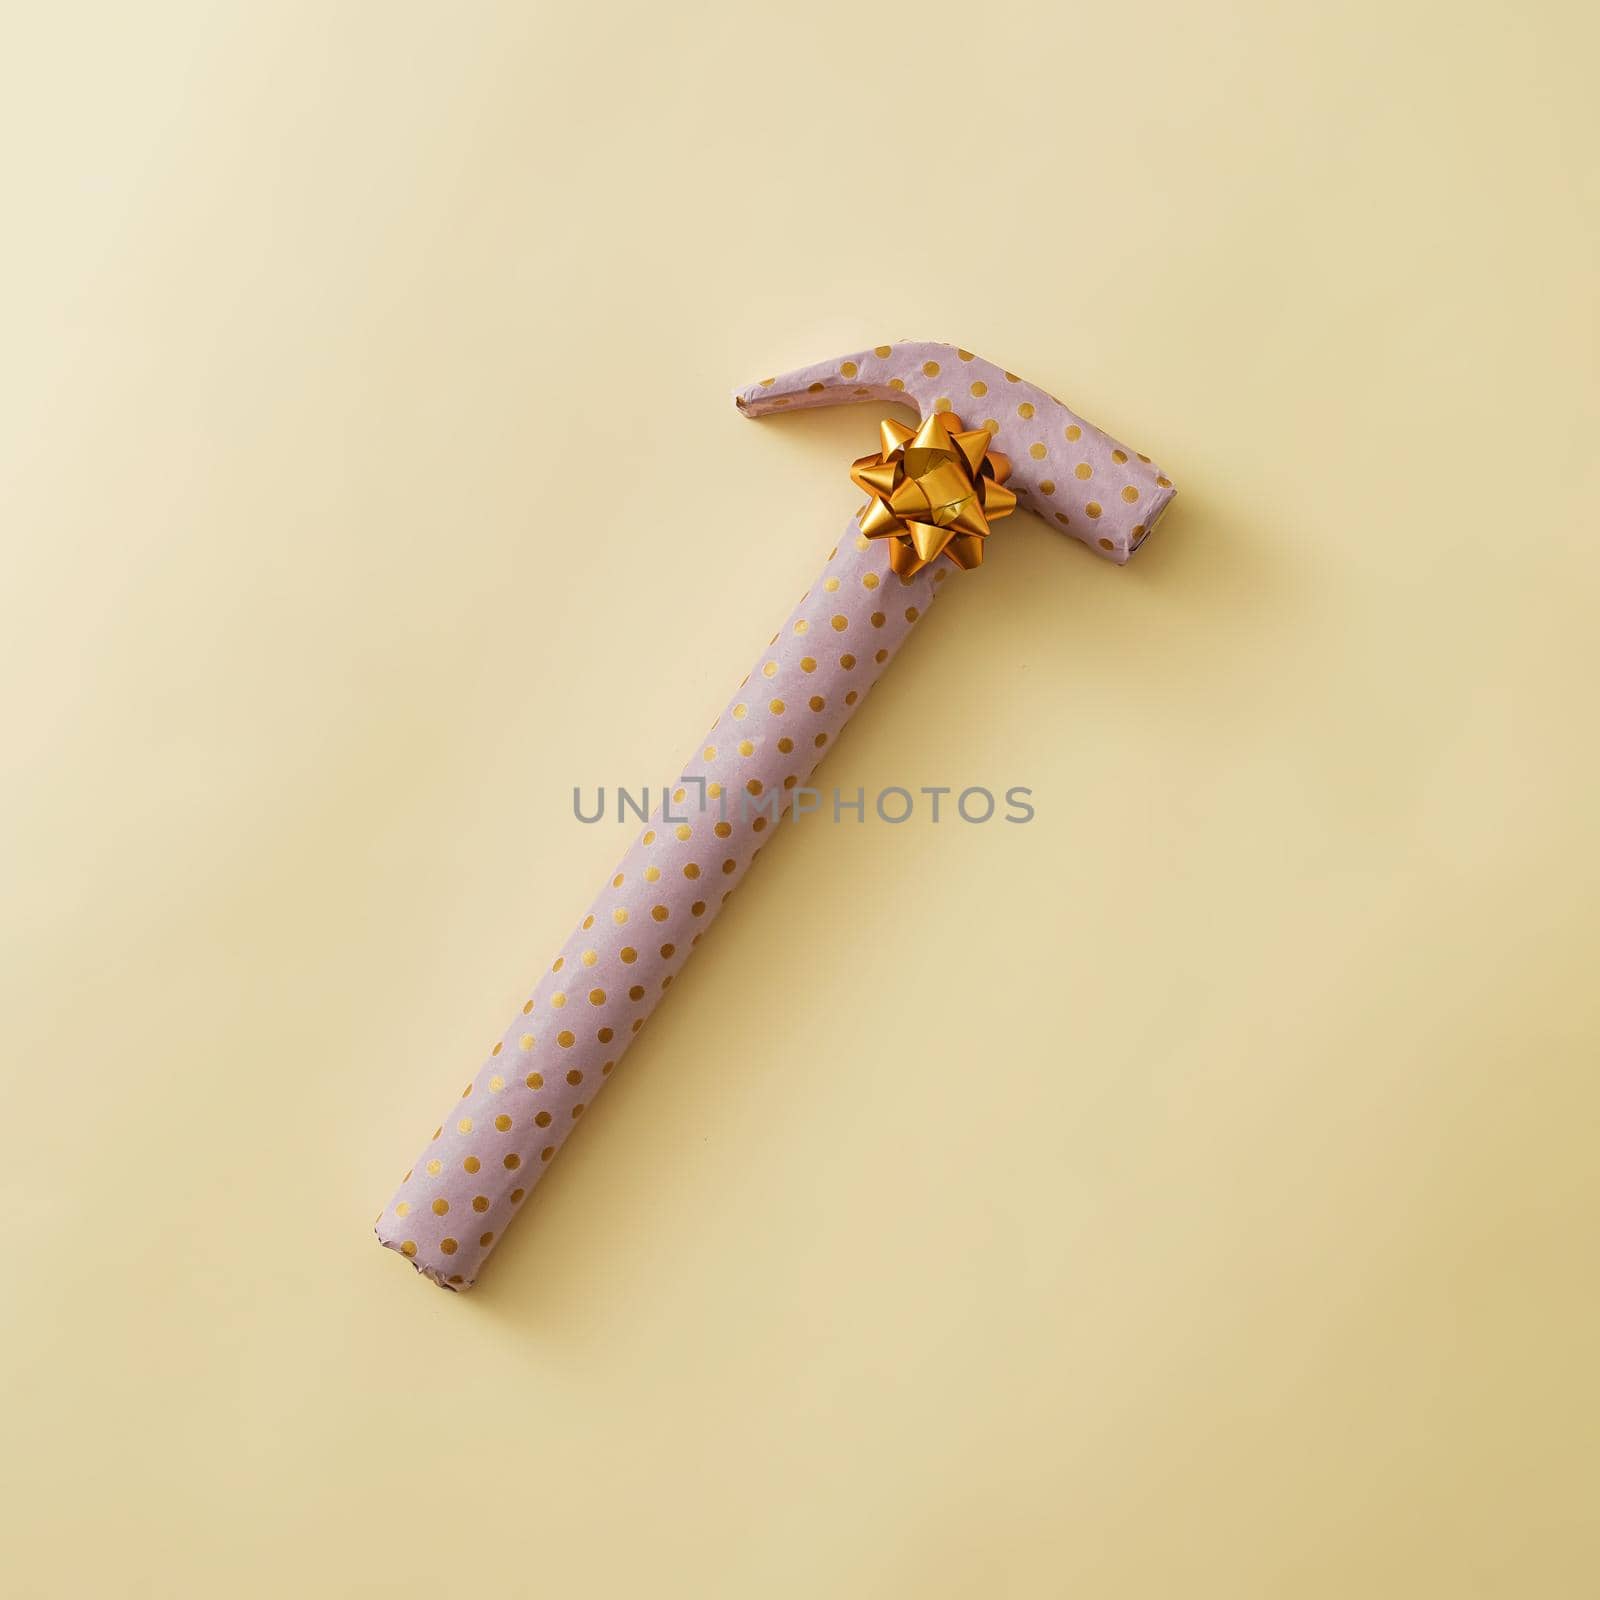 Gift wrapped hammer in yellow polka dot paper by sergii_gnatiuk